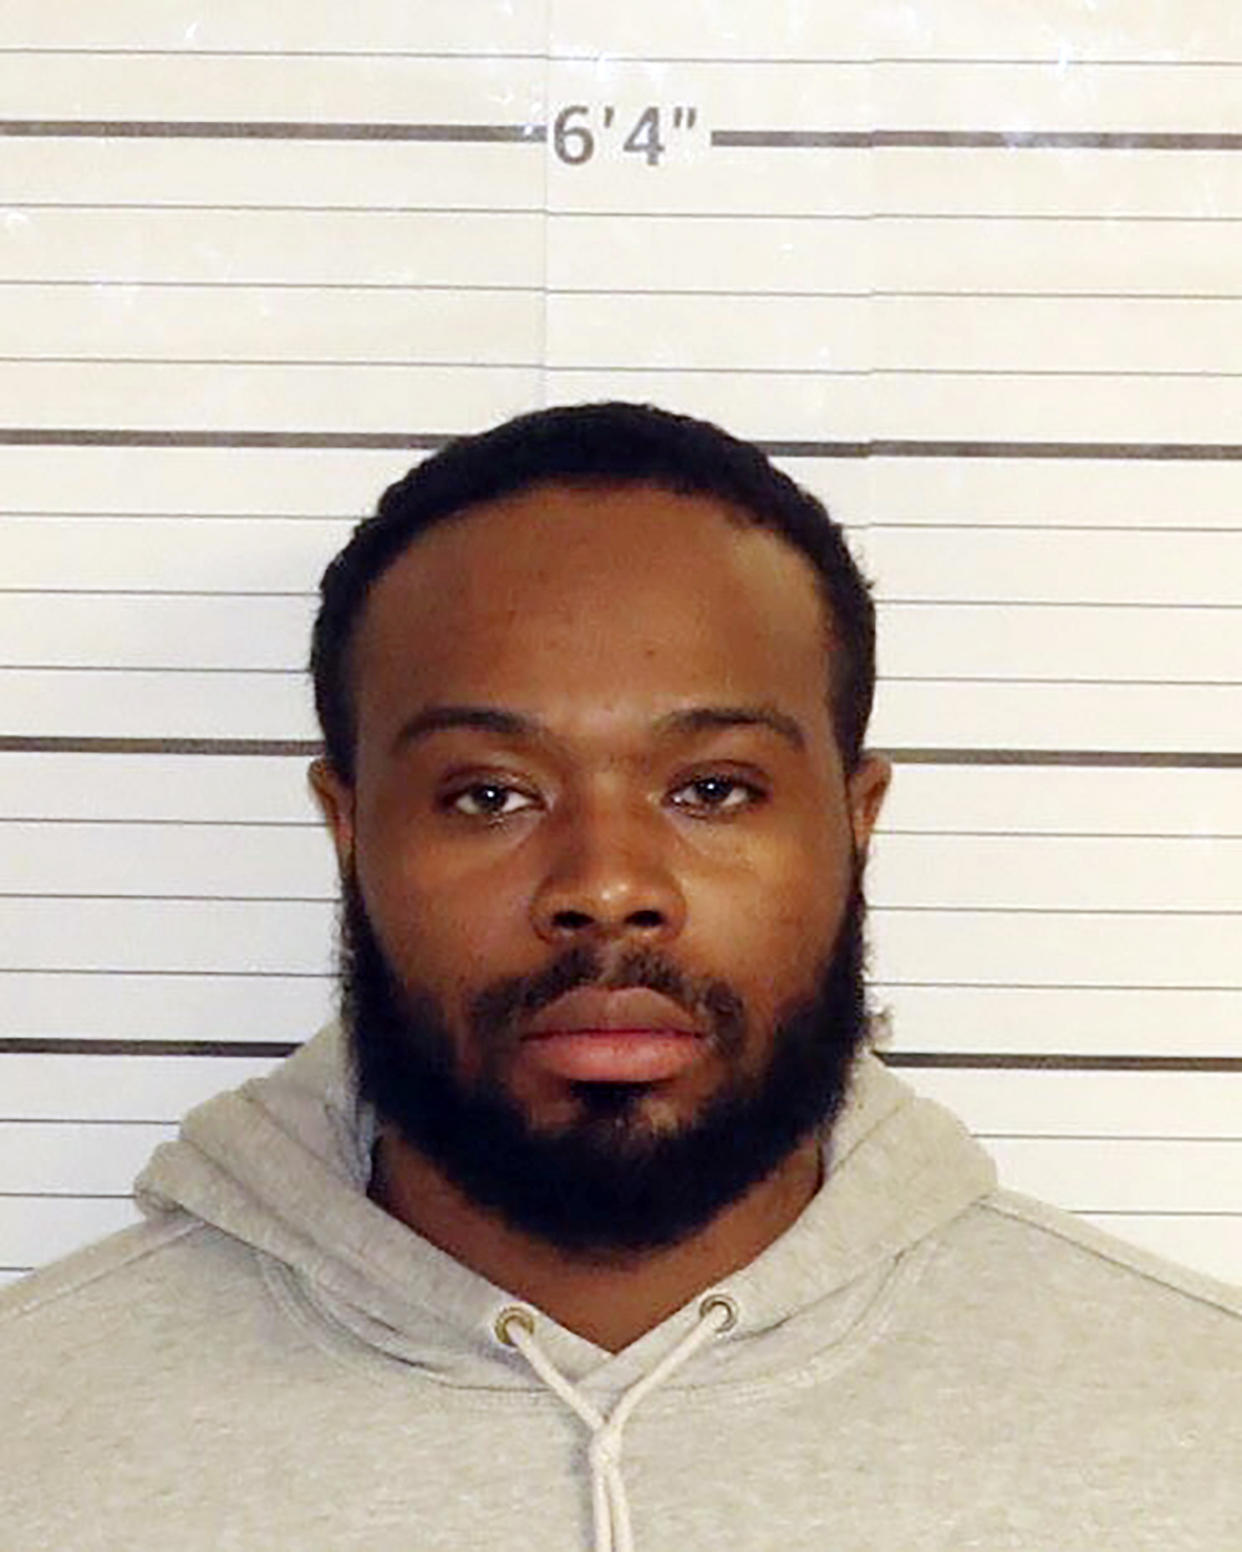 FILE - This Wednesday, Jan. 26, 2023, booking photo provided by the Shelby County Sheriff's Office shows former Memphis Police Officer Demetrius Haley in Memphis, Tenn. Four of five former Memphis police officers charged with murder in the beating death of Tyre Nichols cannot work as law enforcement officers again in Tennessee, a state panel decided Friday, March 24, 2023. The Peace Officer Standards & Training Commission, or P.O.S.T., voted to decertify Haley, Emmitt Martin and Justin Smith during a meeting Friday. (Shelby County Sheriff's Office via AP)